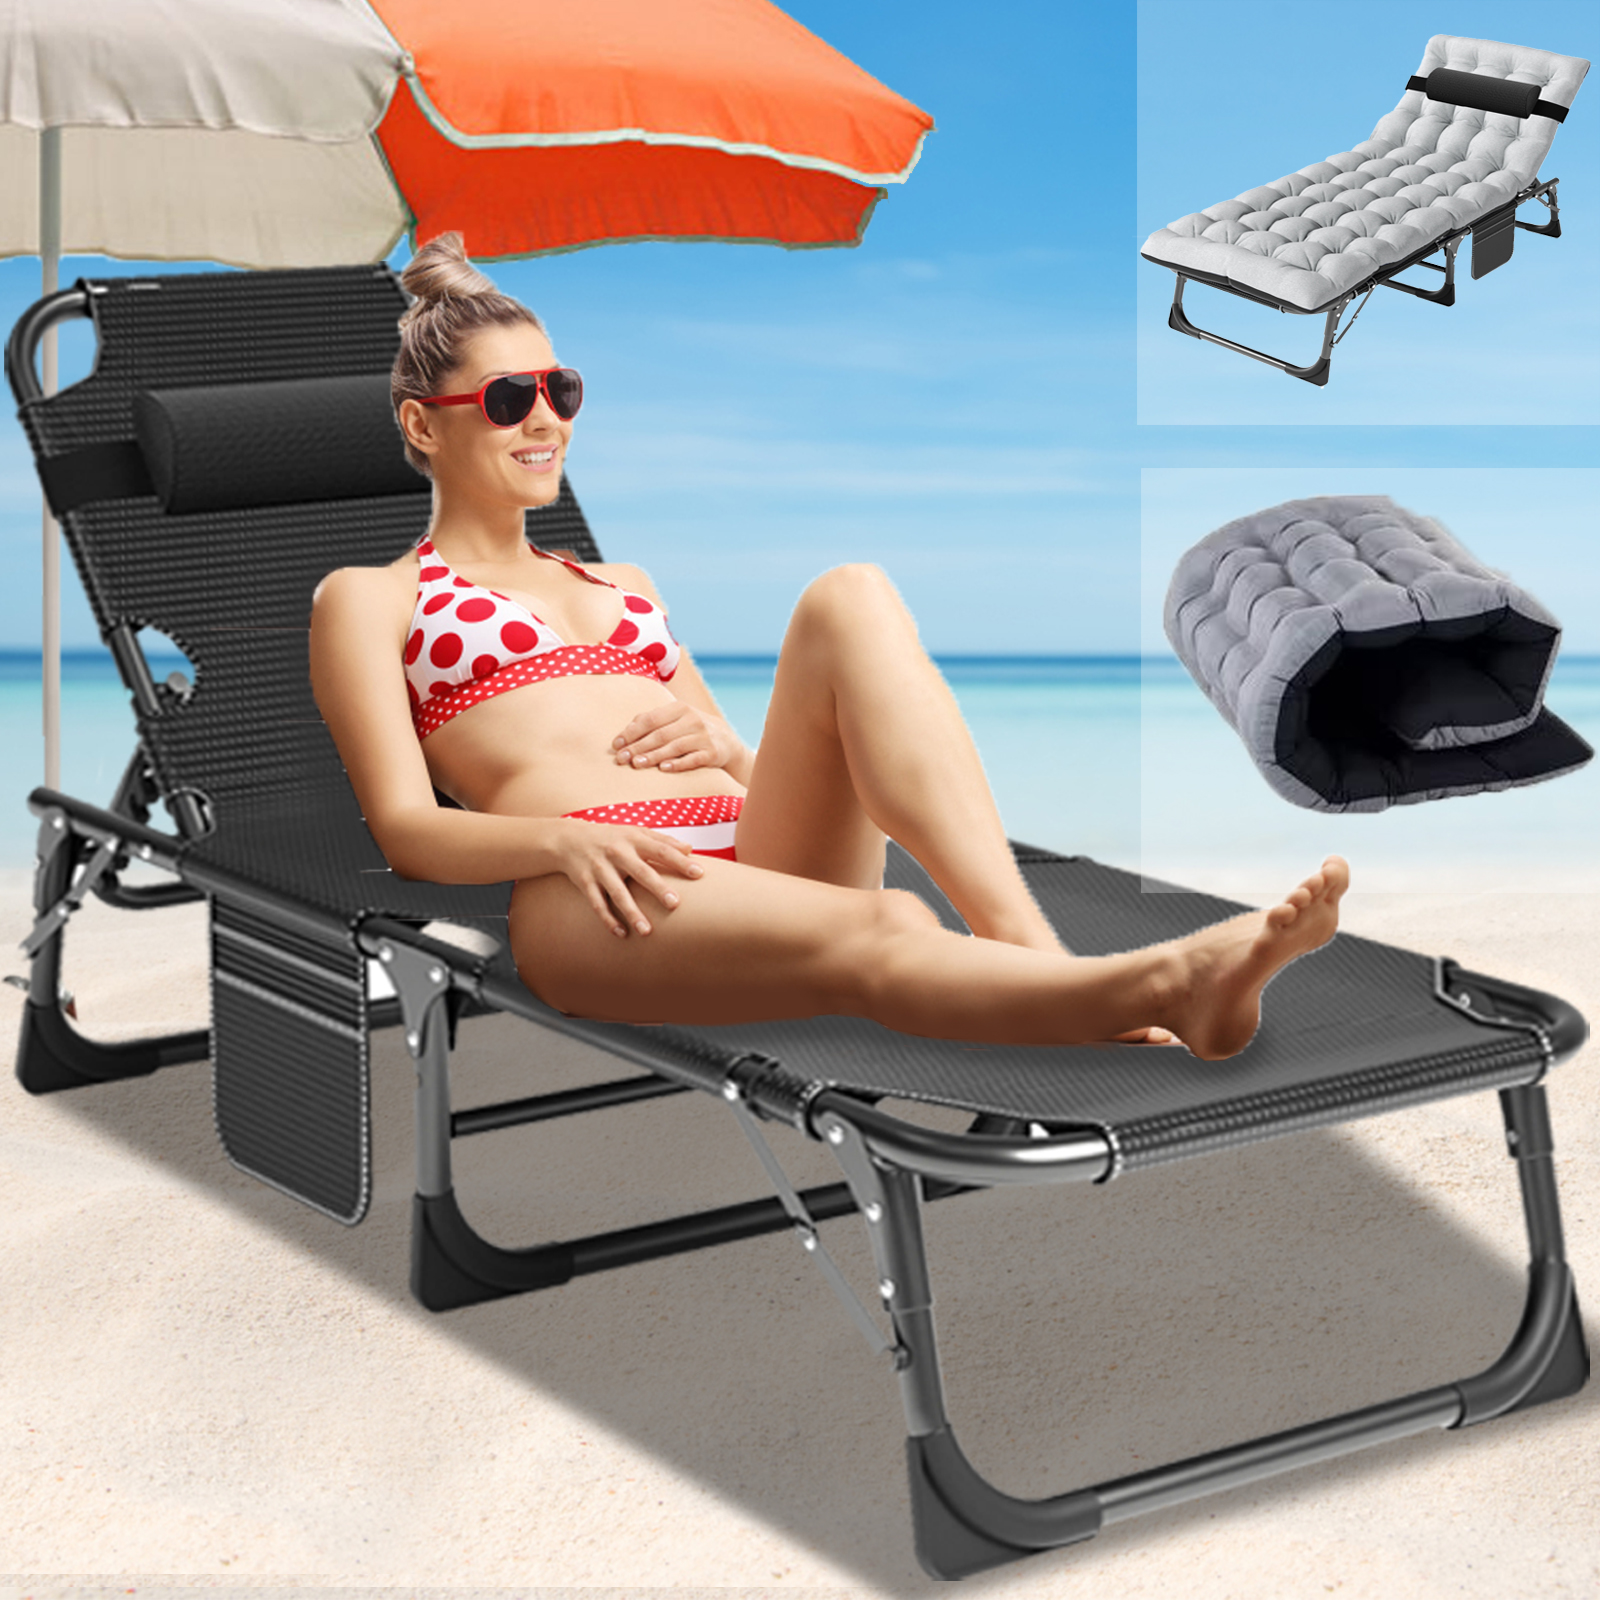 Folding Camping Cot, Adjustable 4-Position Adults Reclining Lounge Chair, Chaise Lounge Chair, for Home/Office Nap and Beach Vacation - image 1 of 9